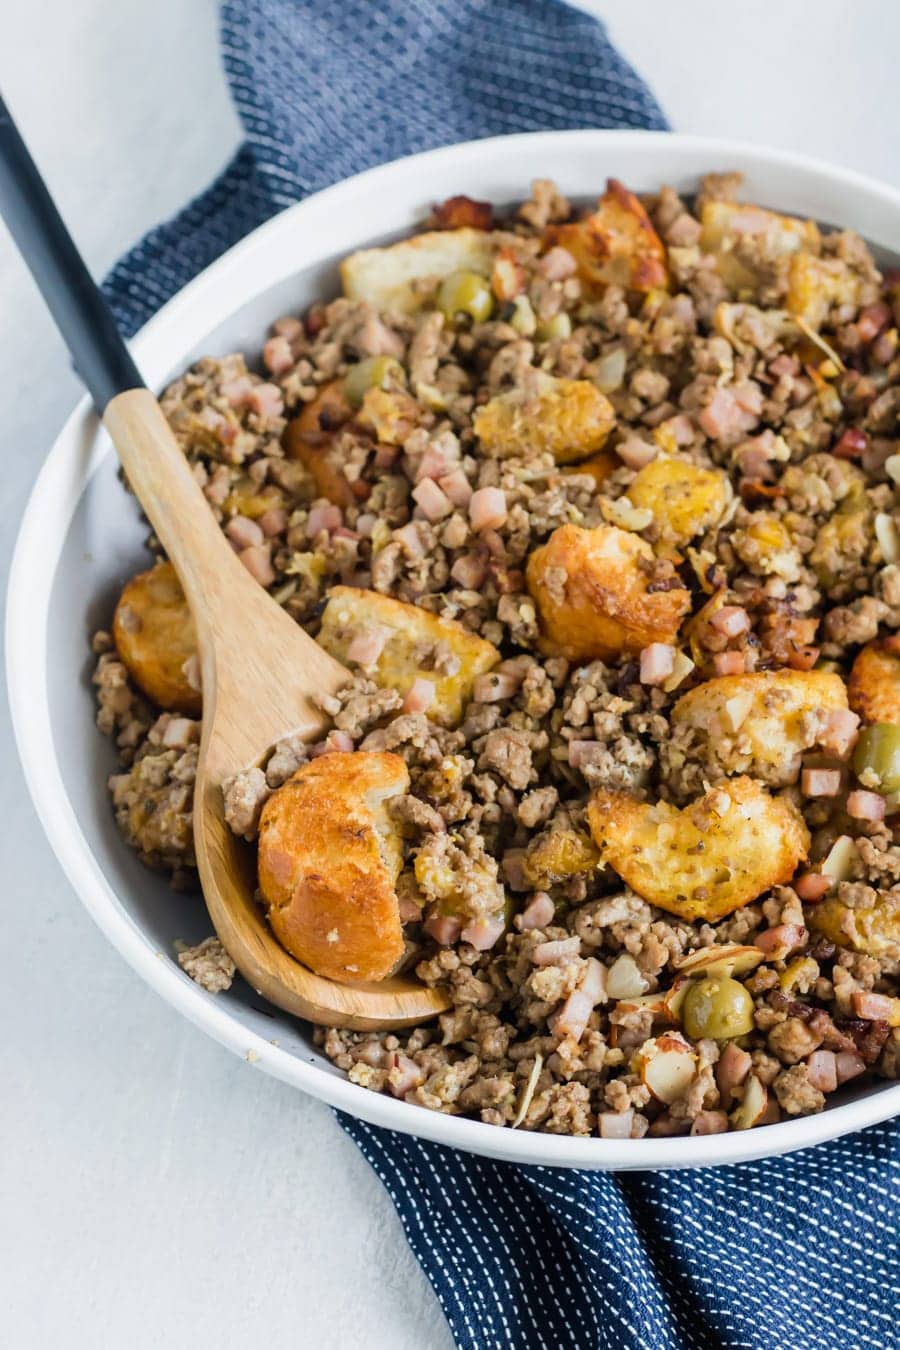 Cubes of toasty French bread mixed with ground beef, ground pork, diced ham, herbs, spices, sliced almonds, chopped olives, and sweet plantains! The BEST stuffing you'll ever try! 